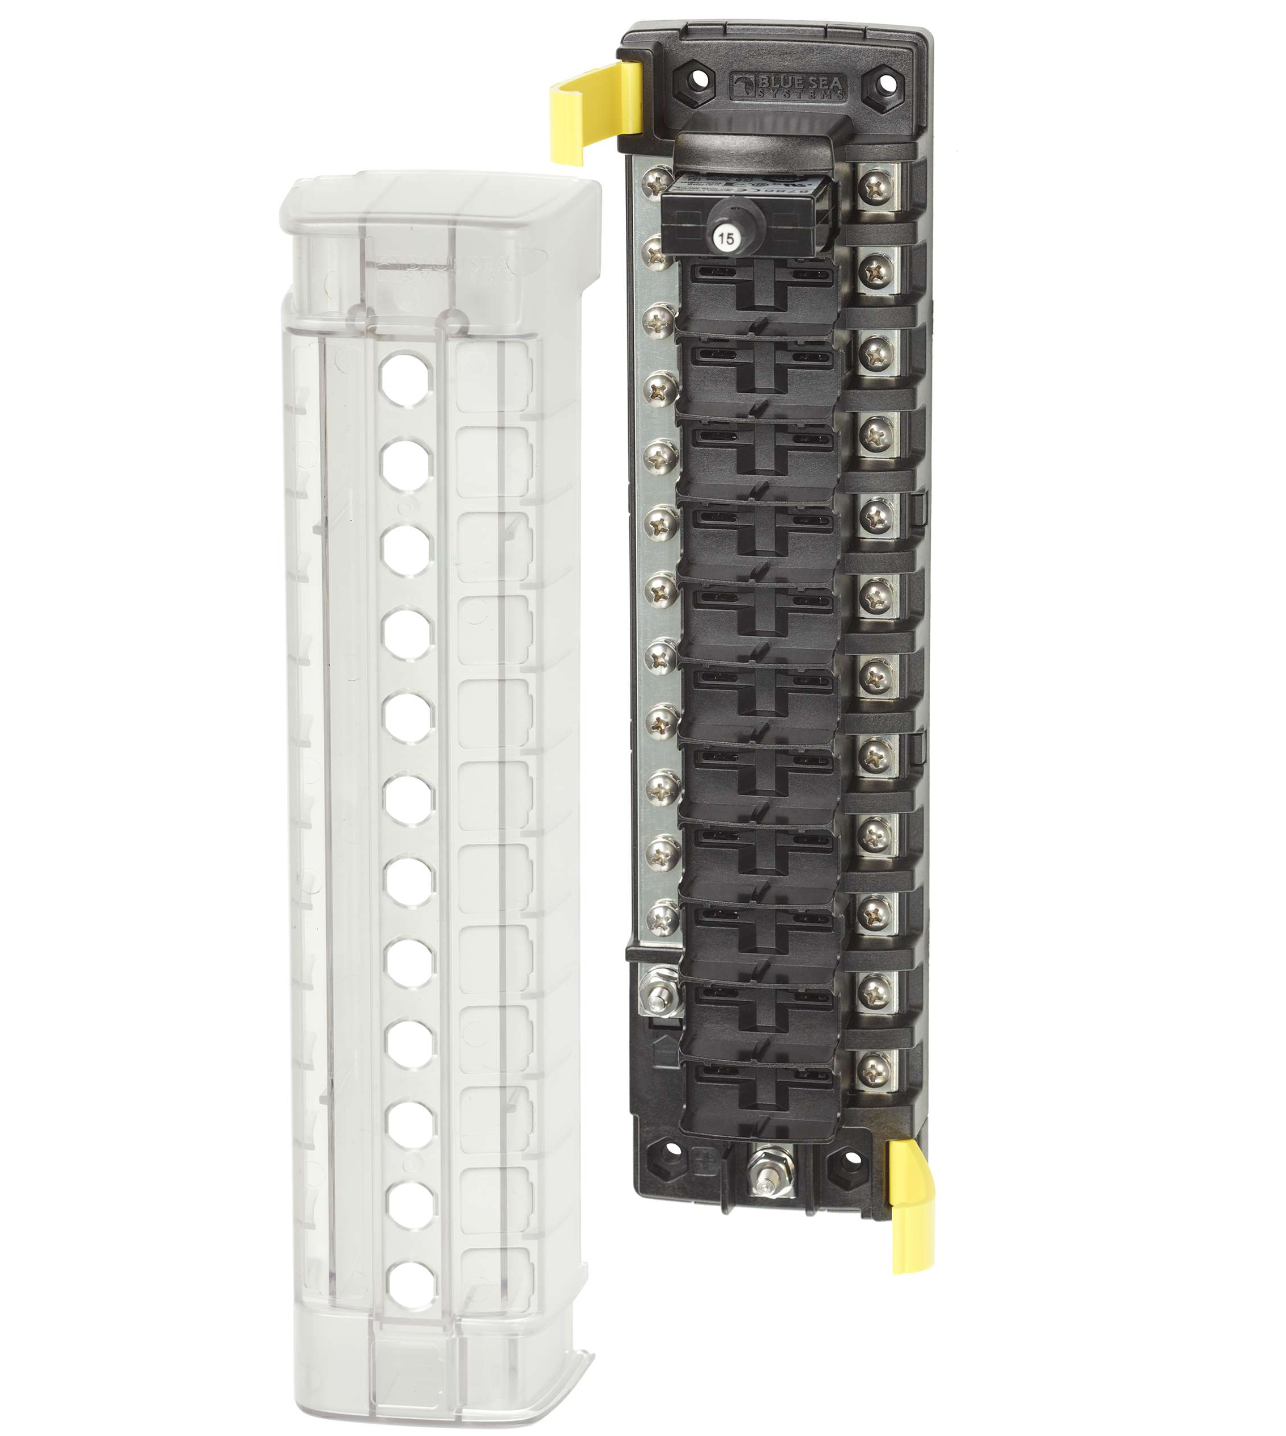 ST CLB Circuit Breaker Block - 12 Position with Negative Bus